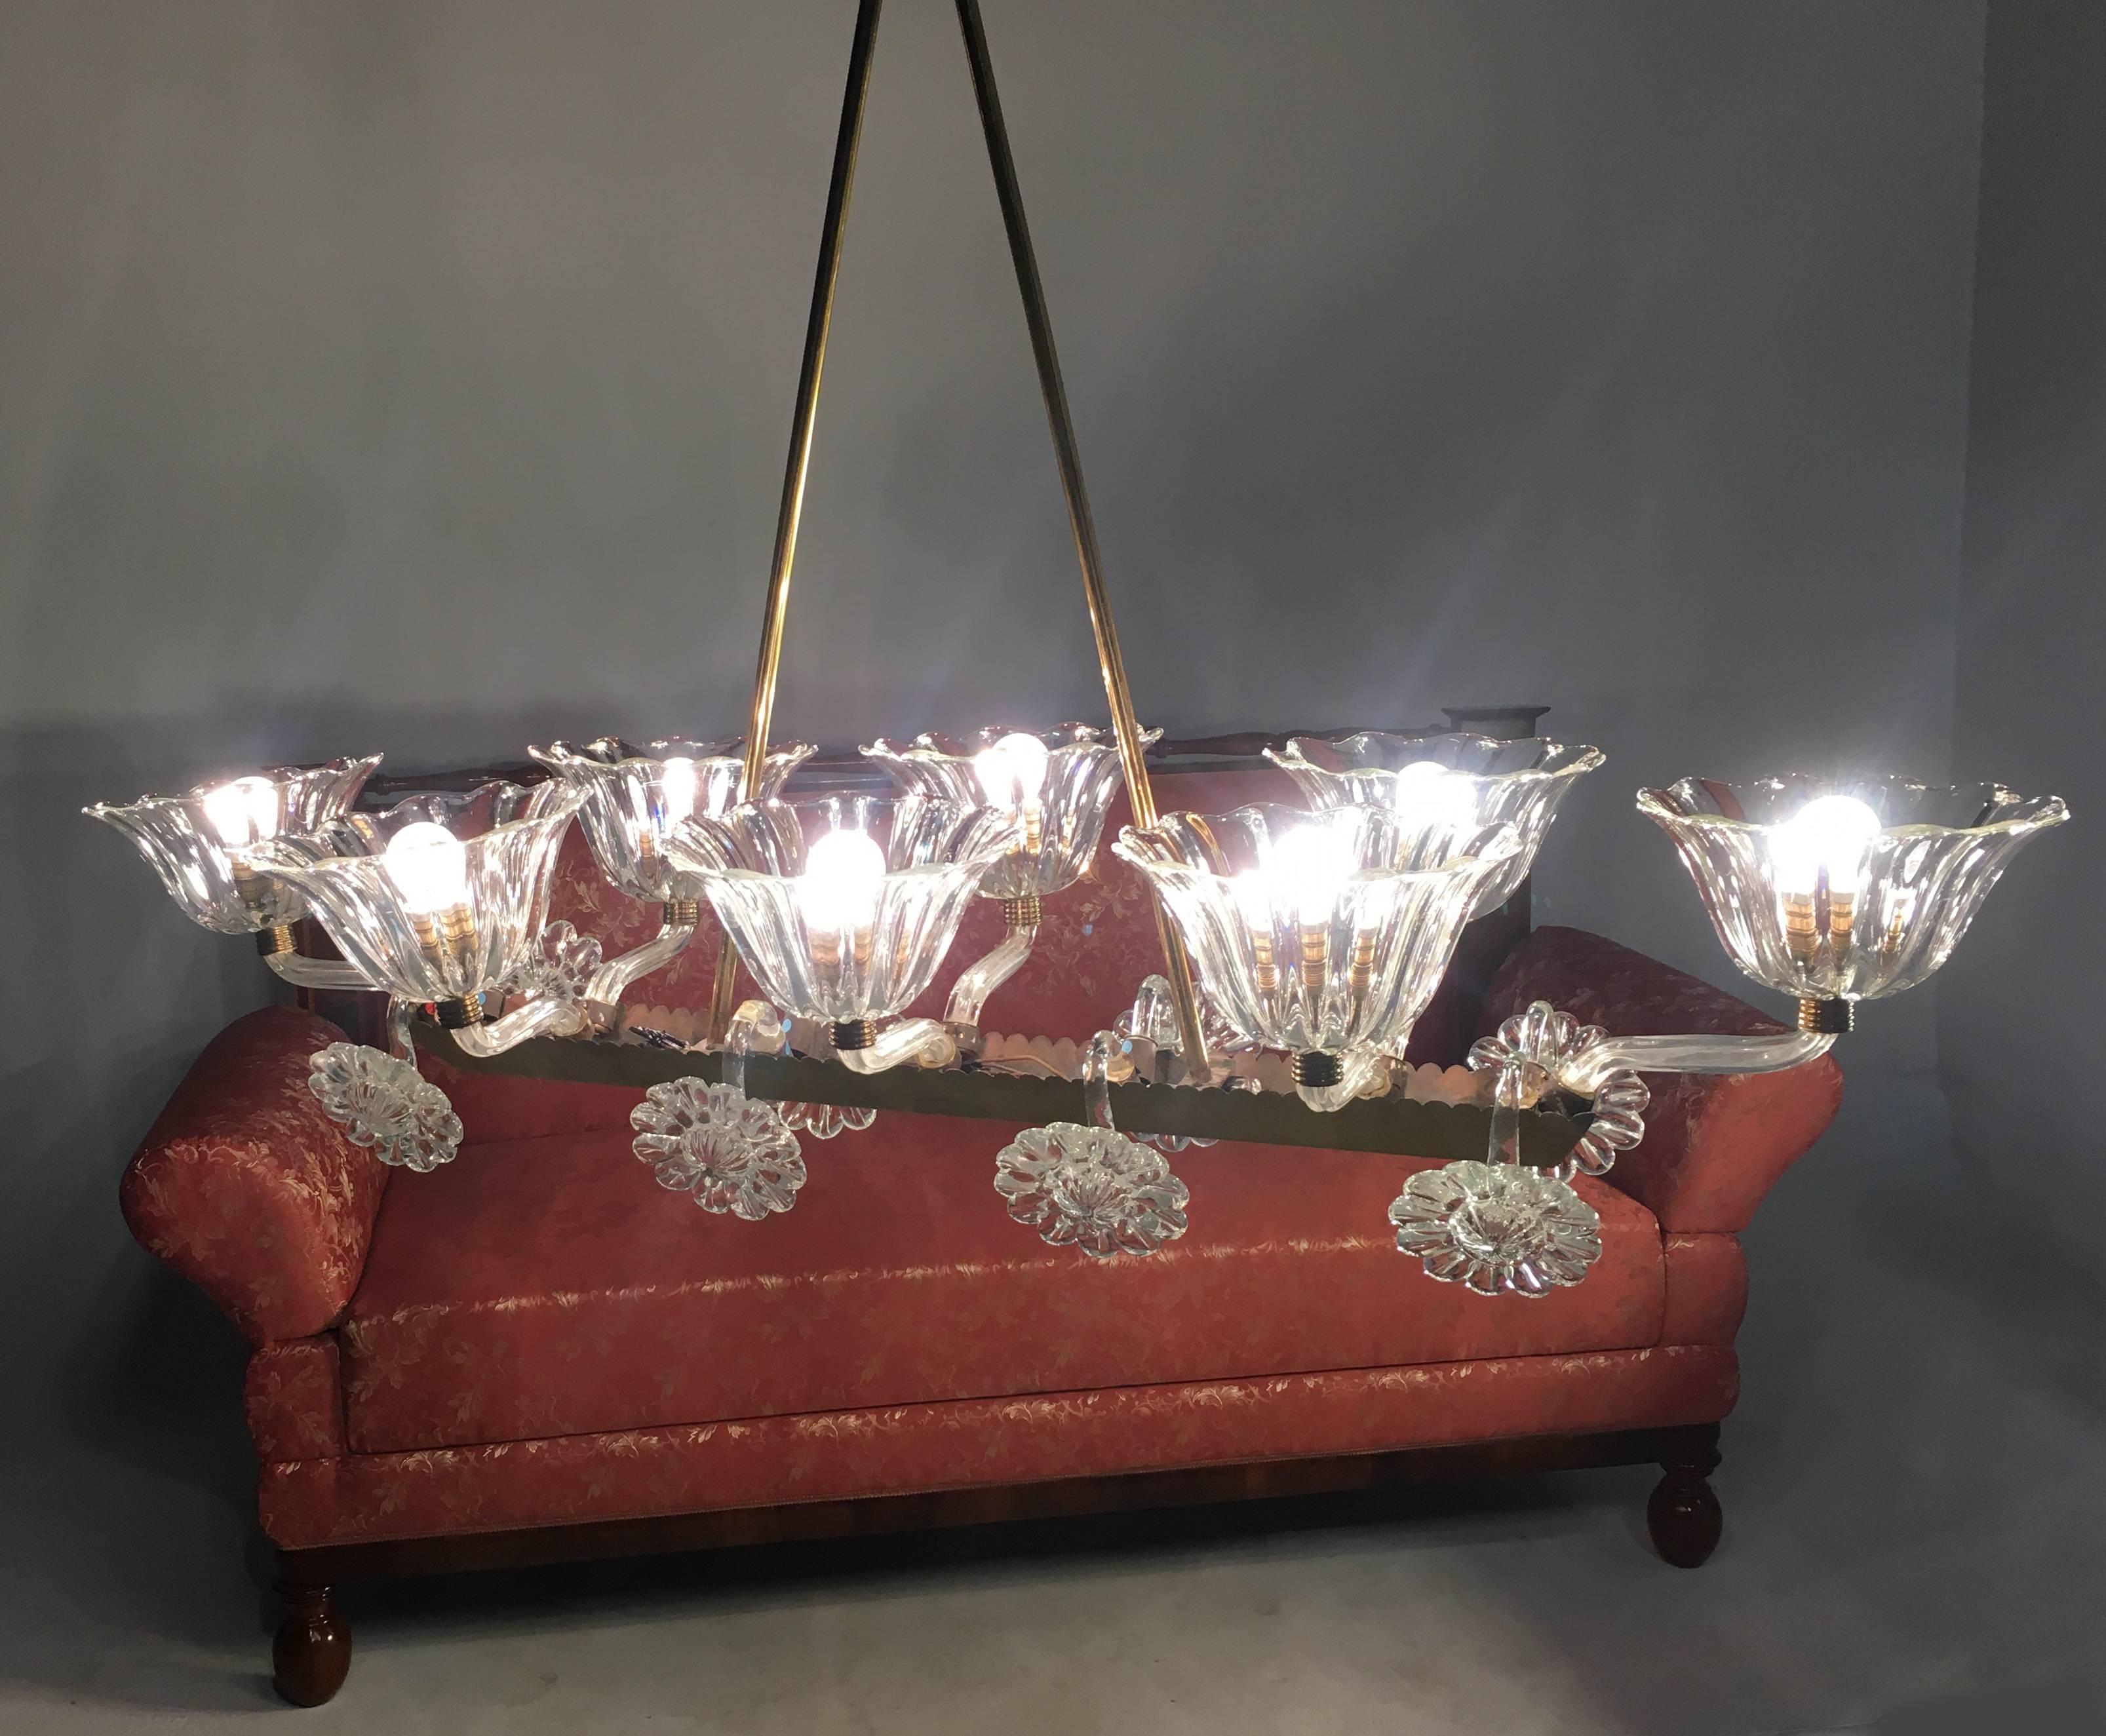 Amazing Liberty Chandelier by Ercole Barovier, Murano, 1940s For Sale 2